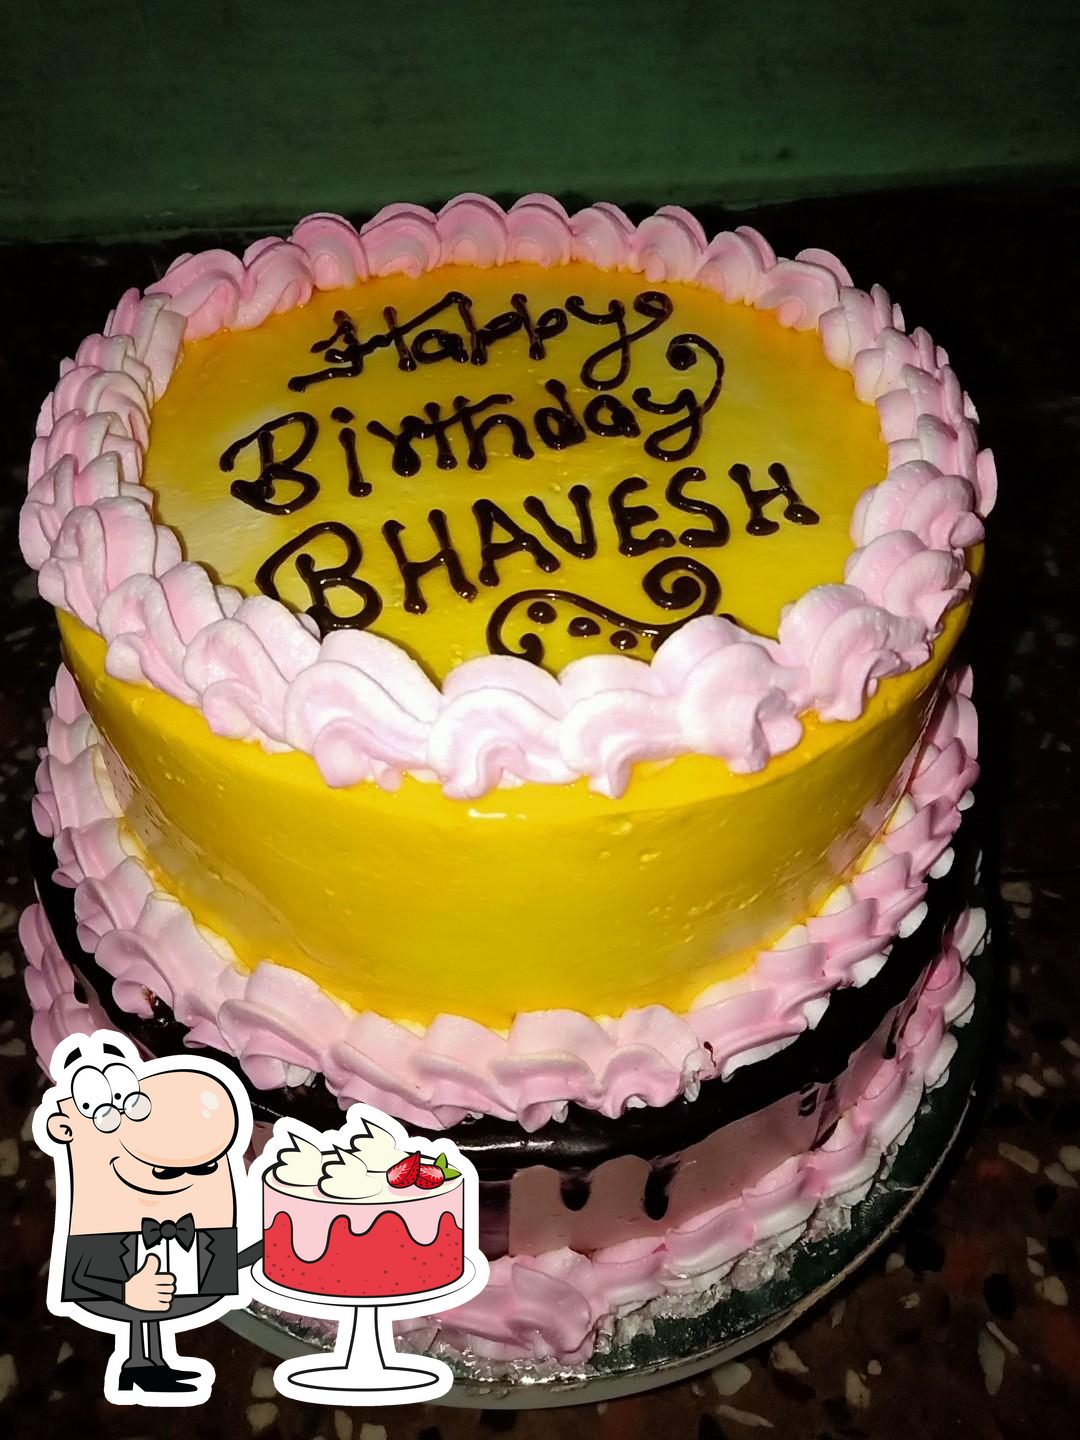 Details more than 74 happy birthday bhavesh cake super hot - in.daotaonec